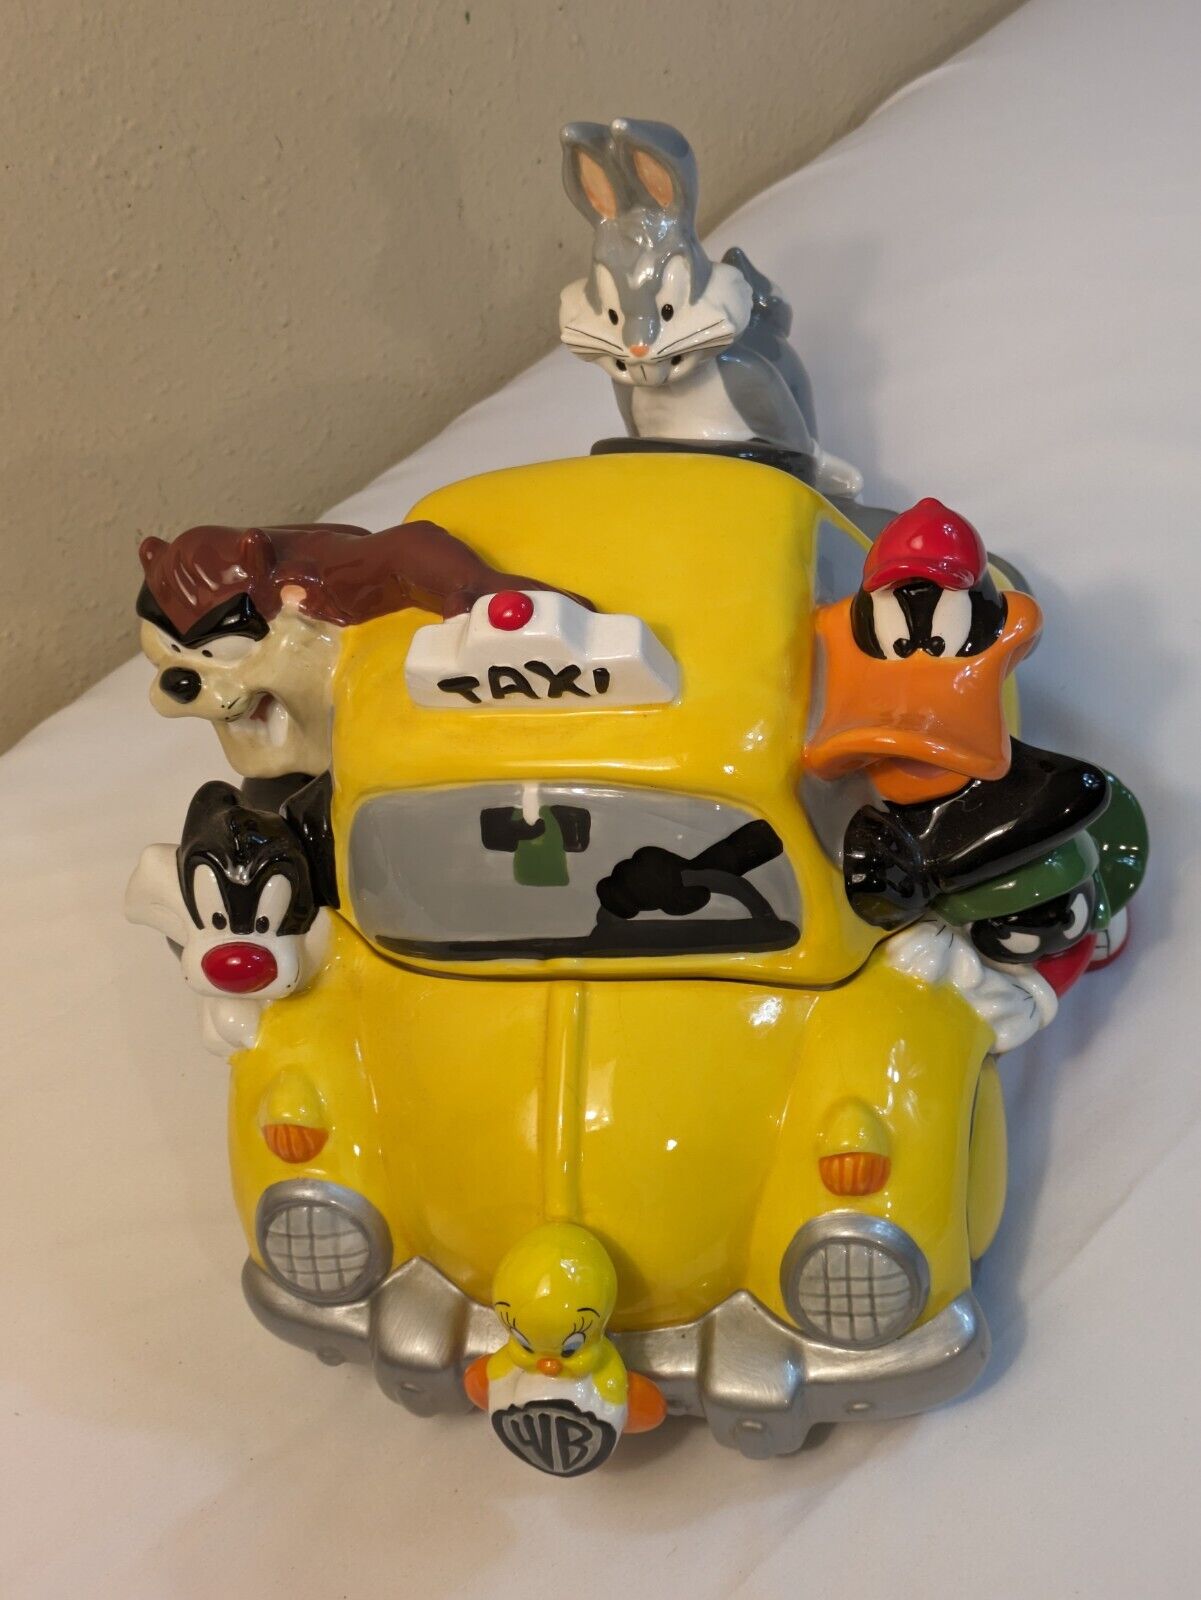  VTG '89 WARNER BROS LOONEY TUNES BUGS BUNNY AND FRIENDS NYC TAXI CAB COOKIE JAR